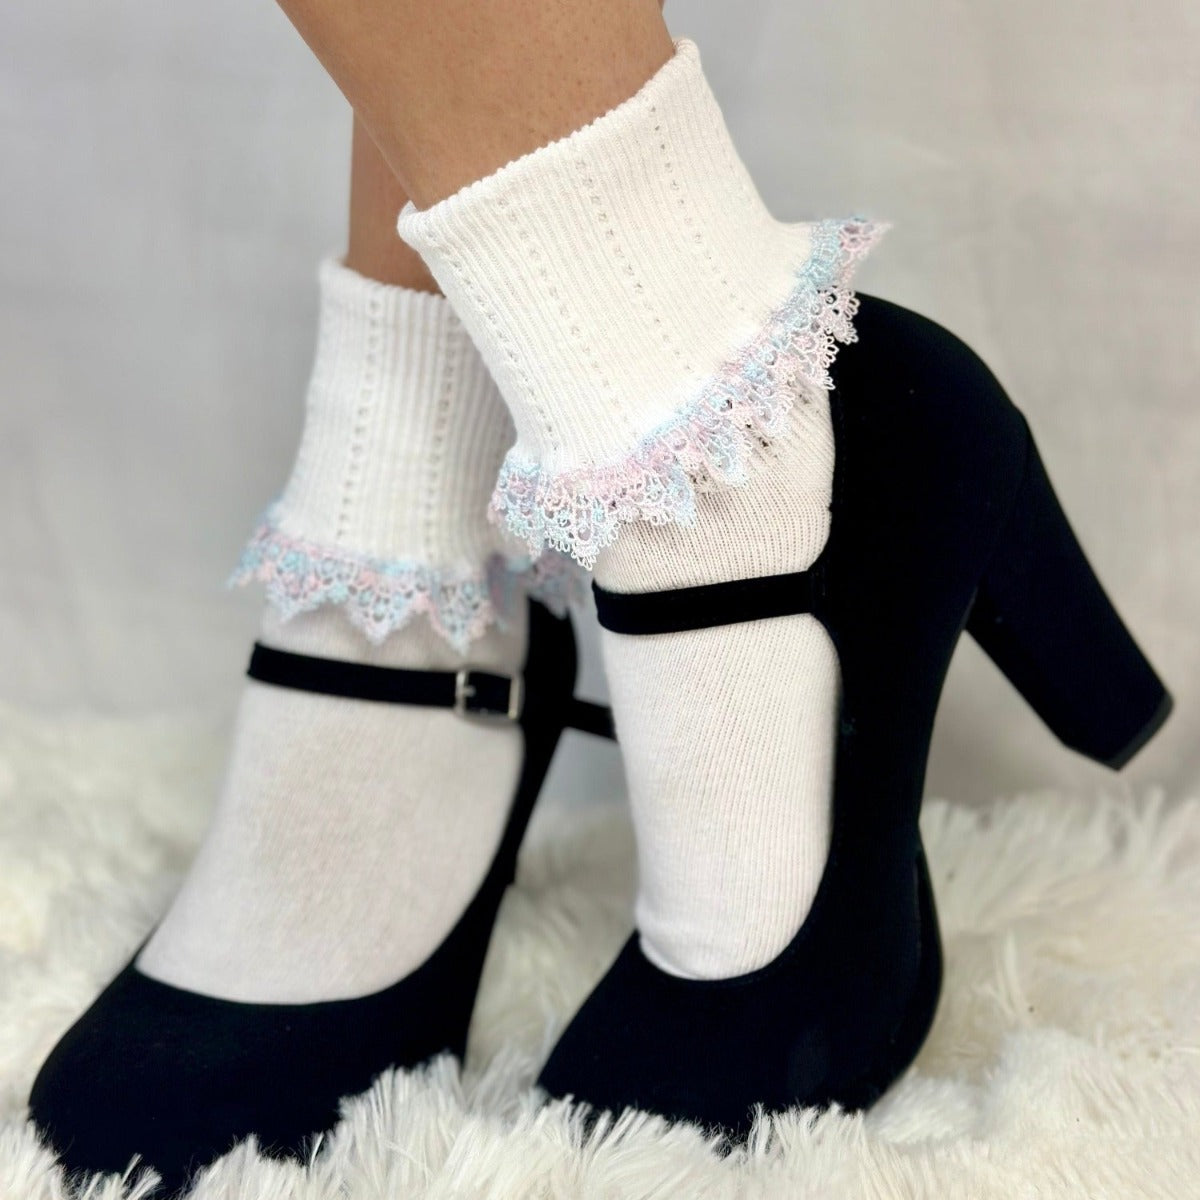 OMBRE" tatted  lace cuff ankle socks  - white blue, ladies best quality lace trimmed socks, Amazon lace socks.